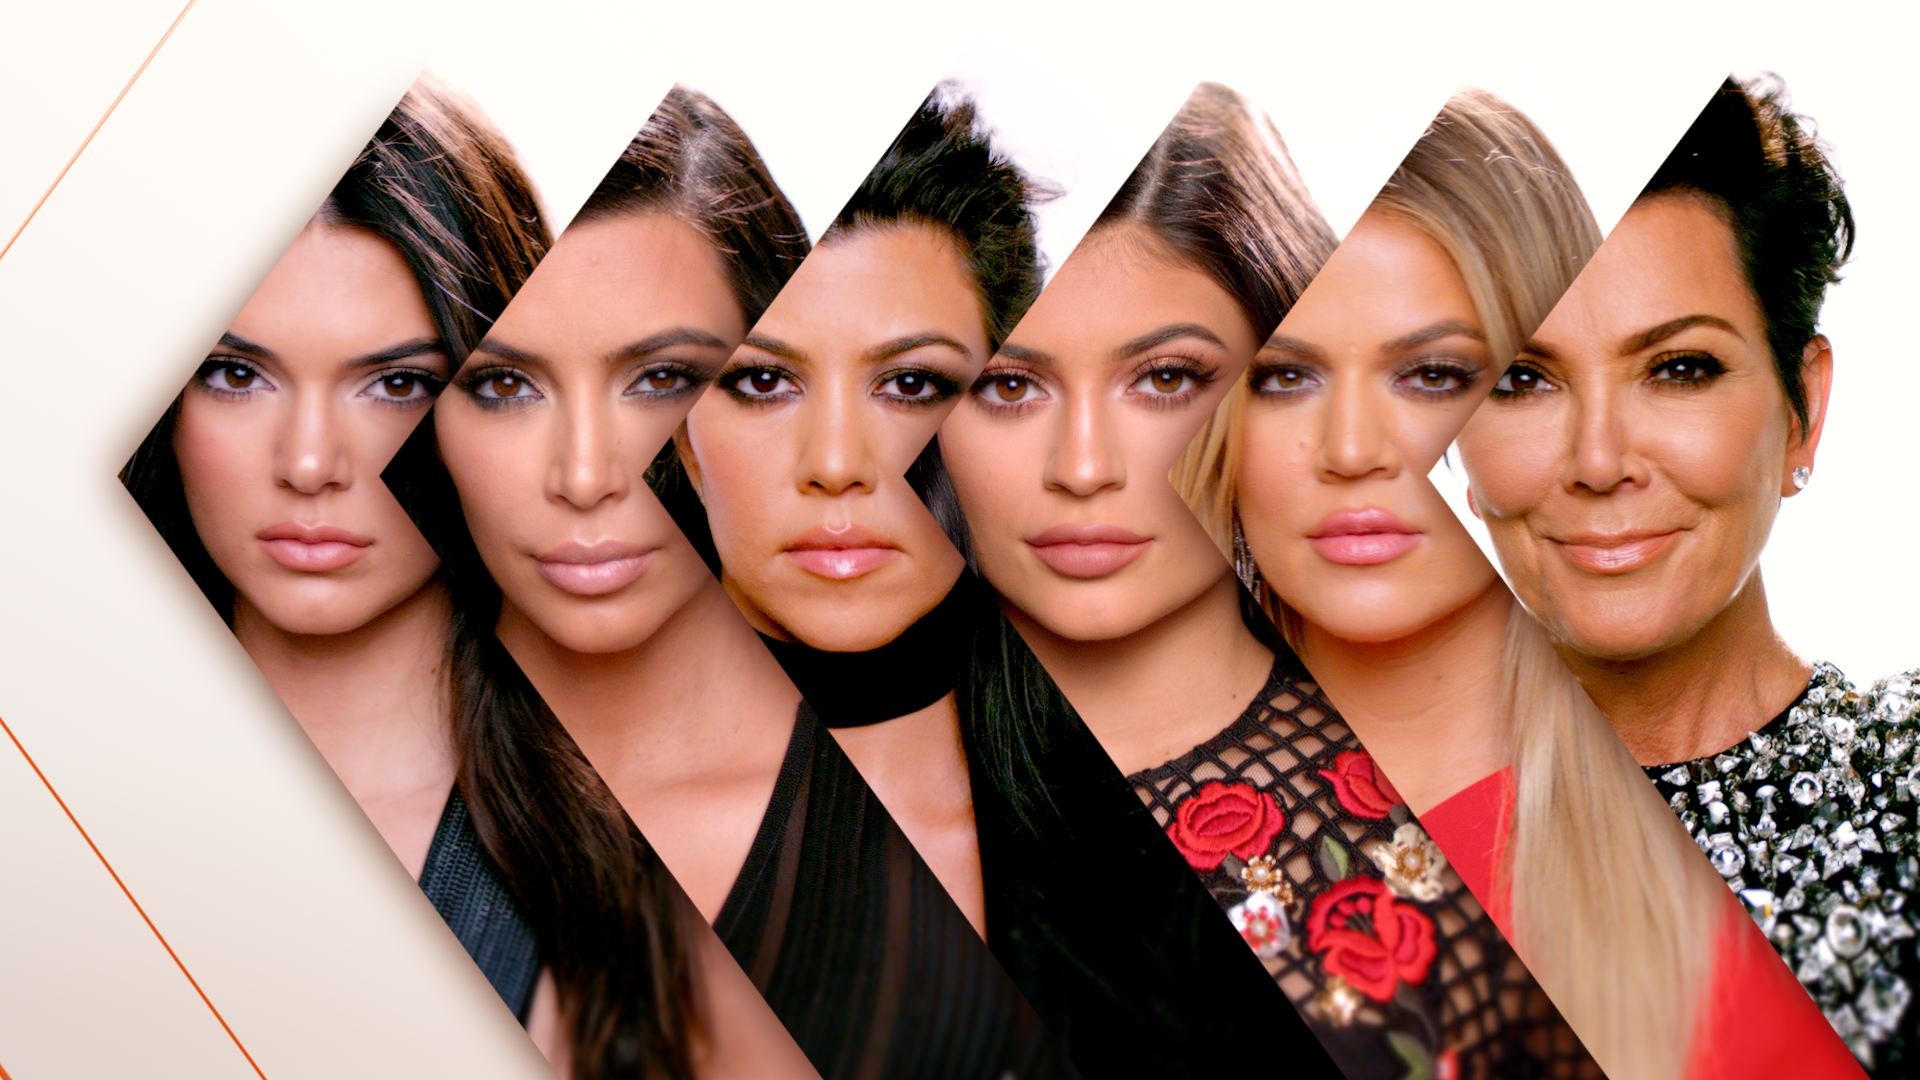 Keeping Up with the Kardashians, Celebrity wallpapers, Fan backgrounds, Iconic cast, 1920x1080 Full HD Desktop